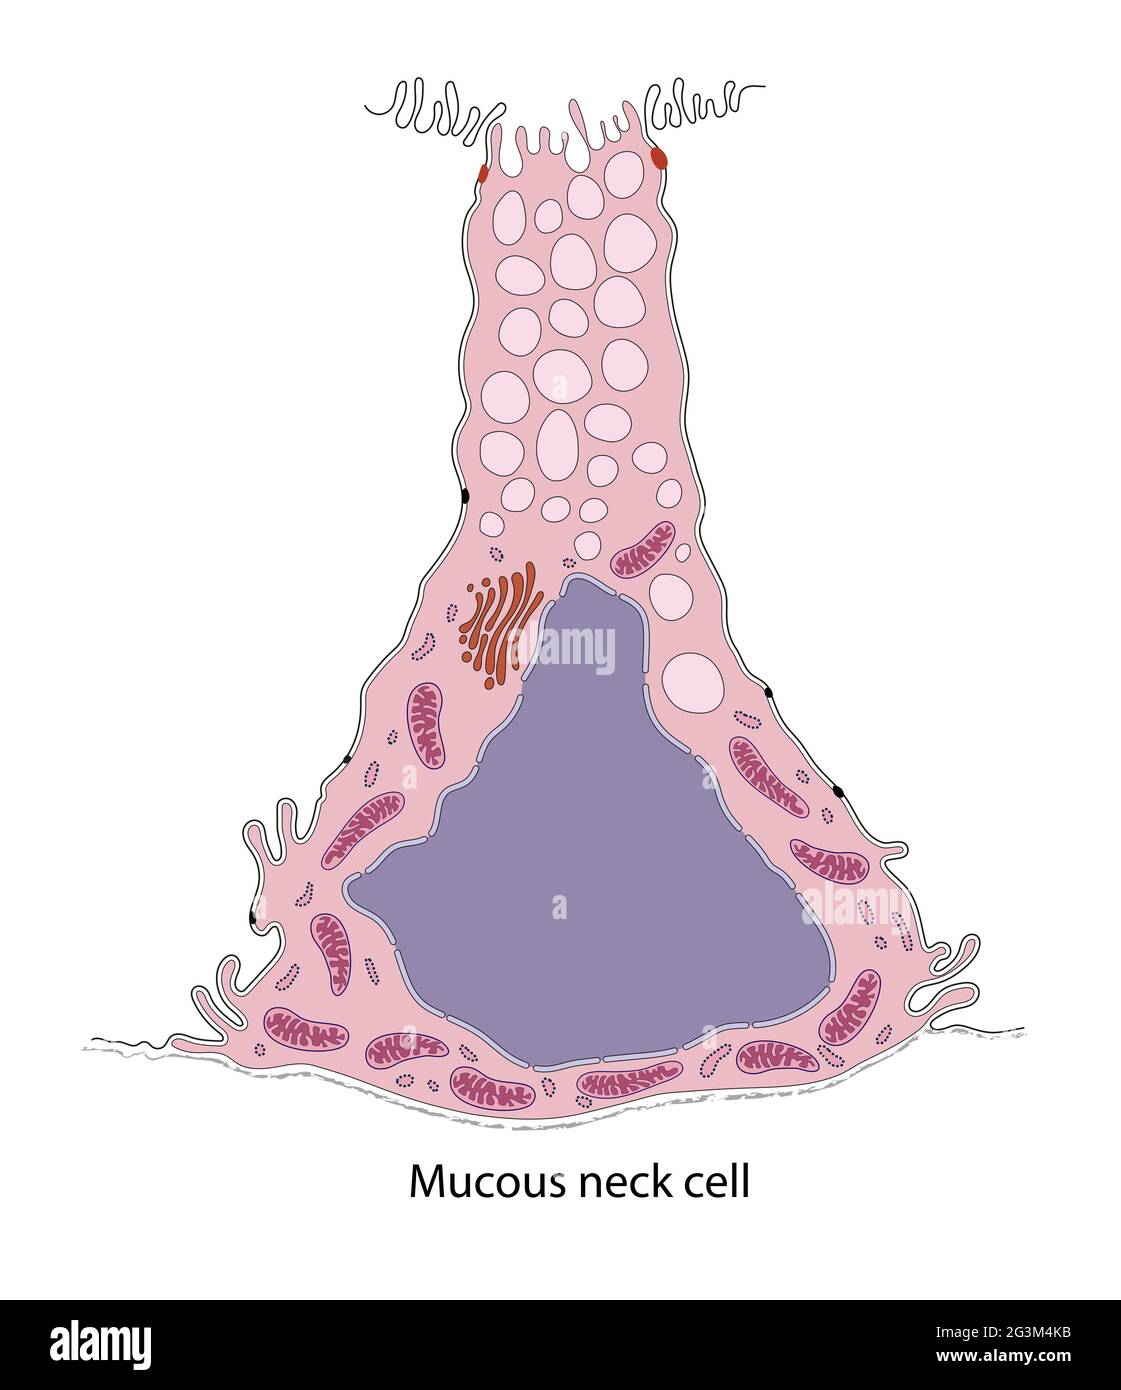 Diagram of gastric mucous neck cell Stock Photo